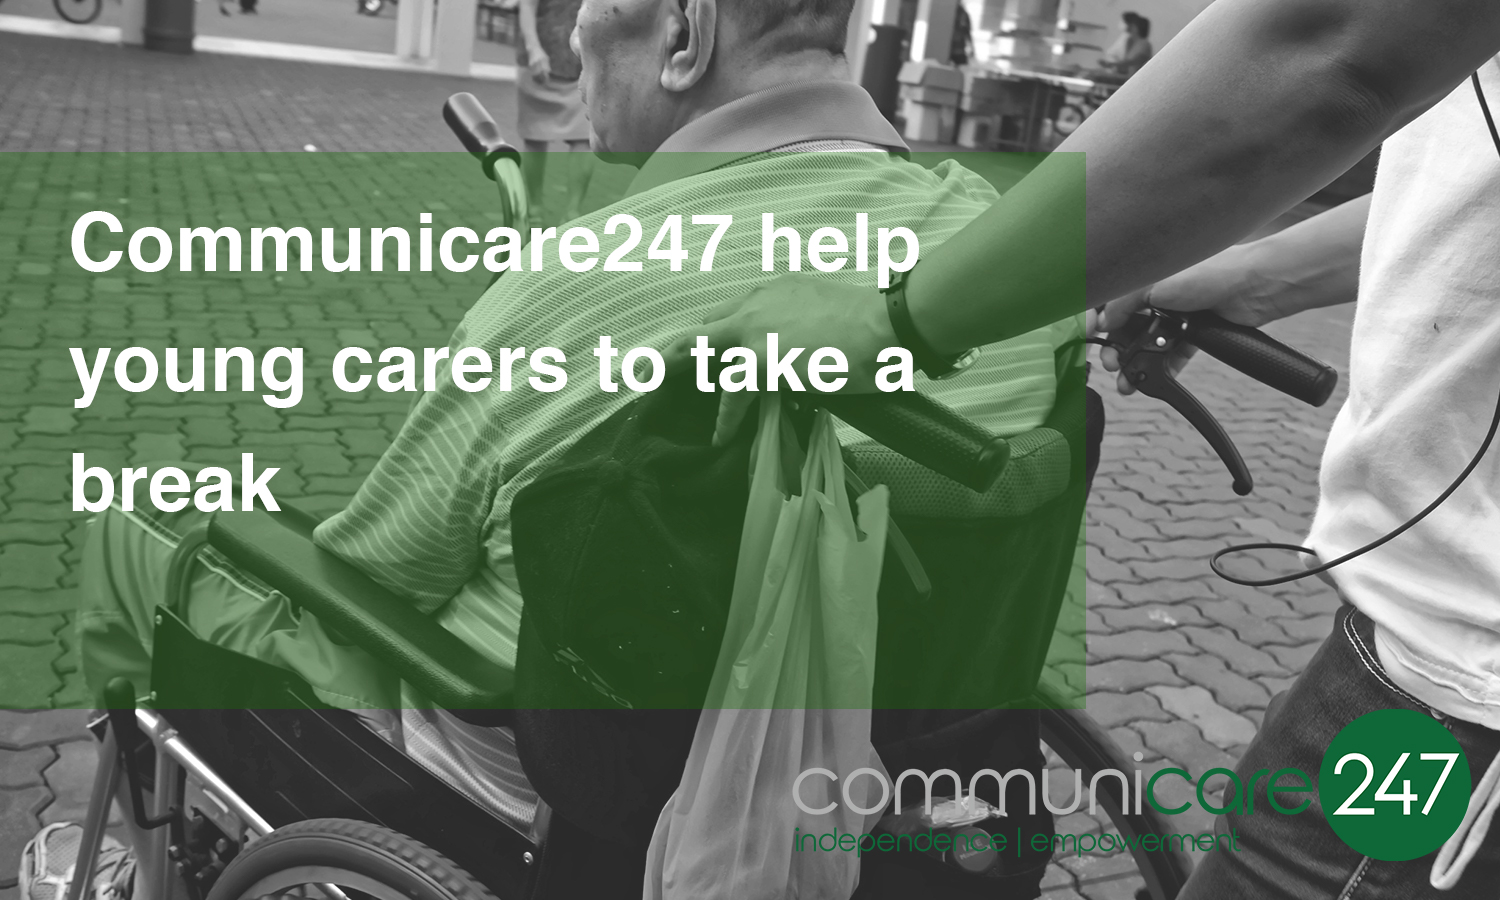 Communicare247 helps young carers to take a break